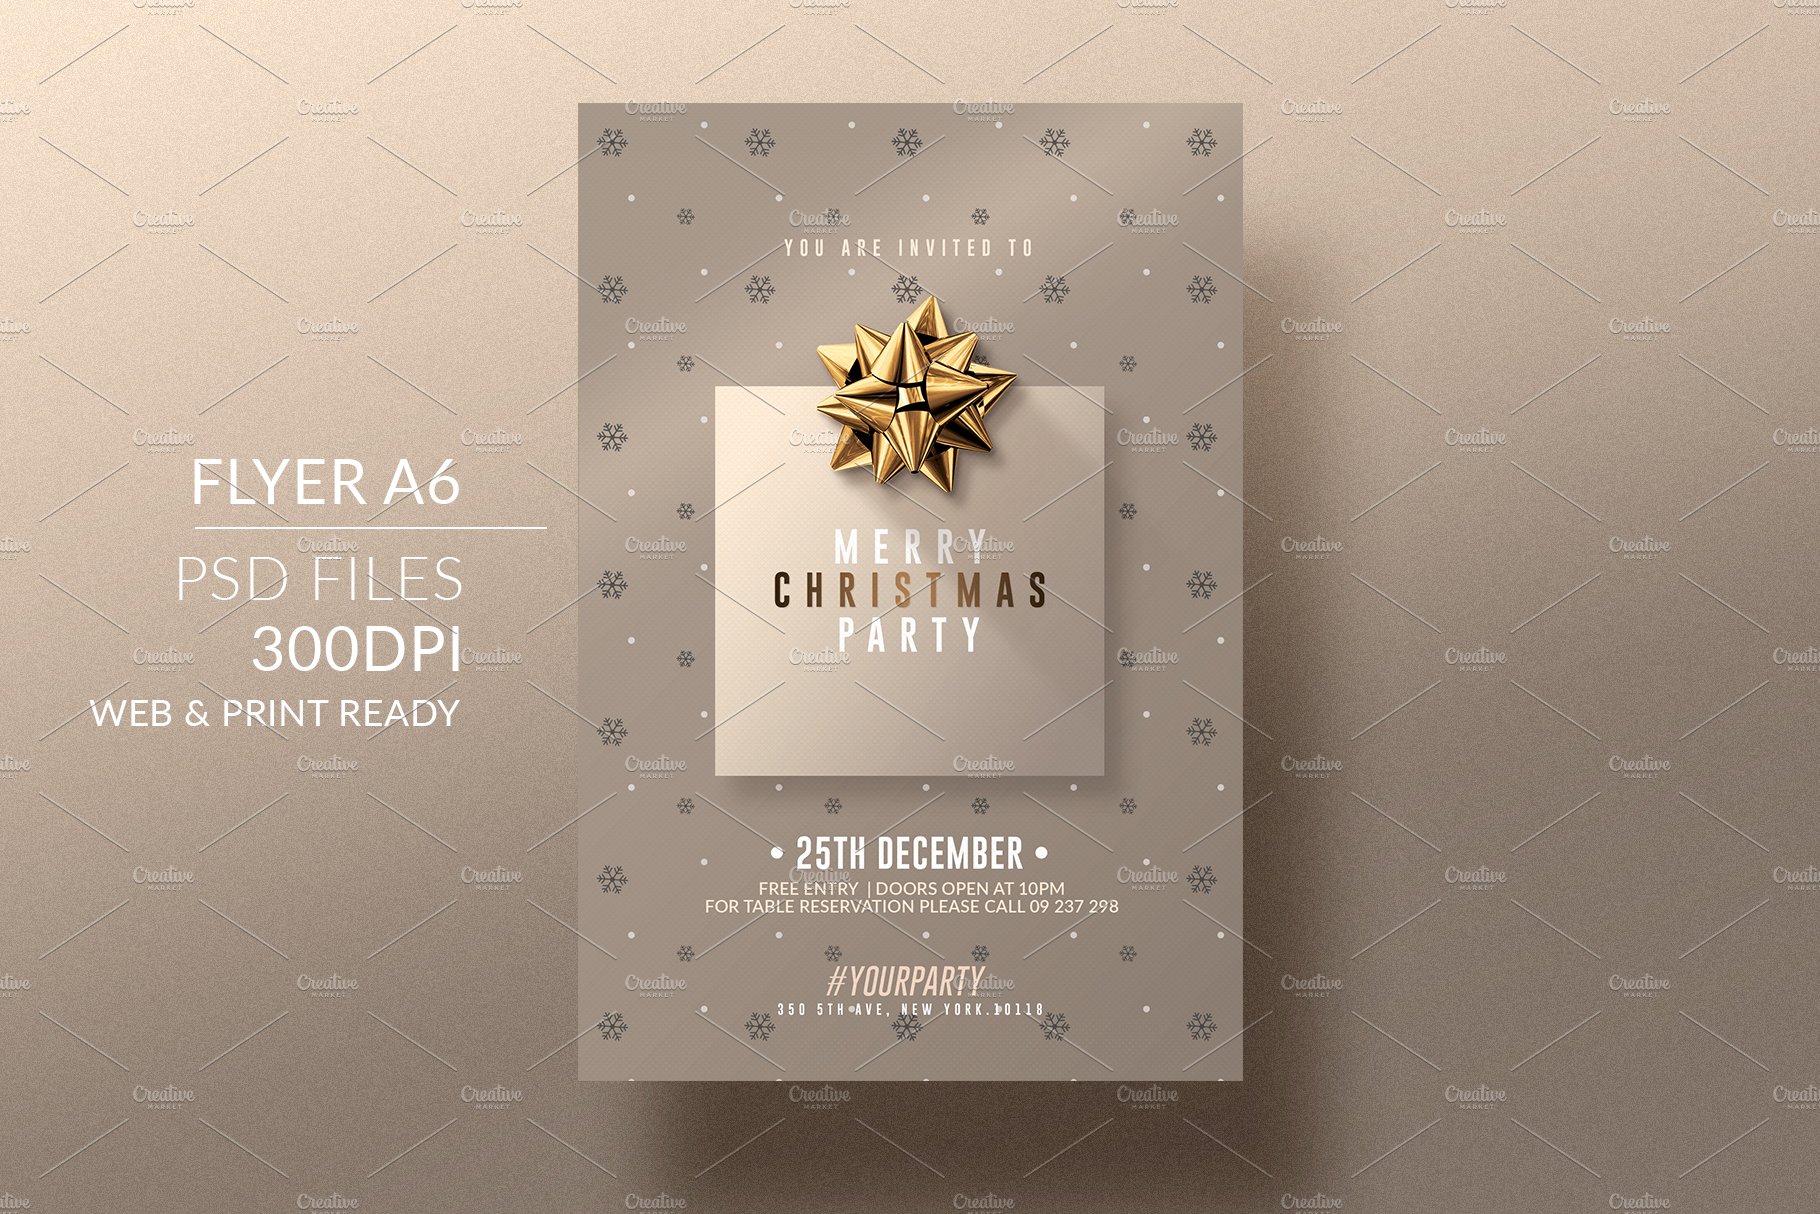 2 Classy Christmas | Psd Invitations preview image.